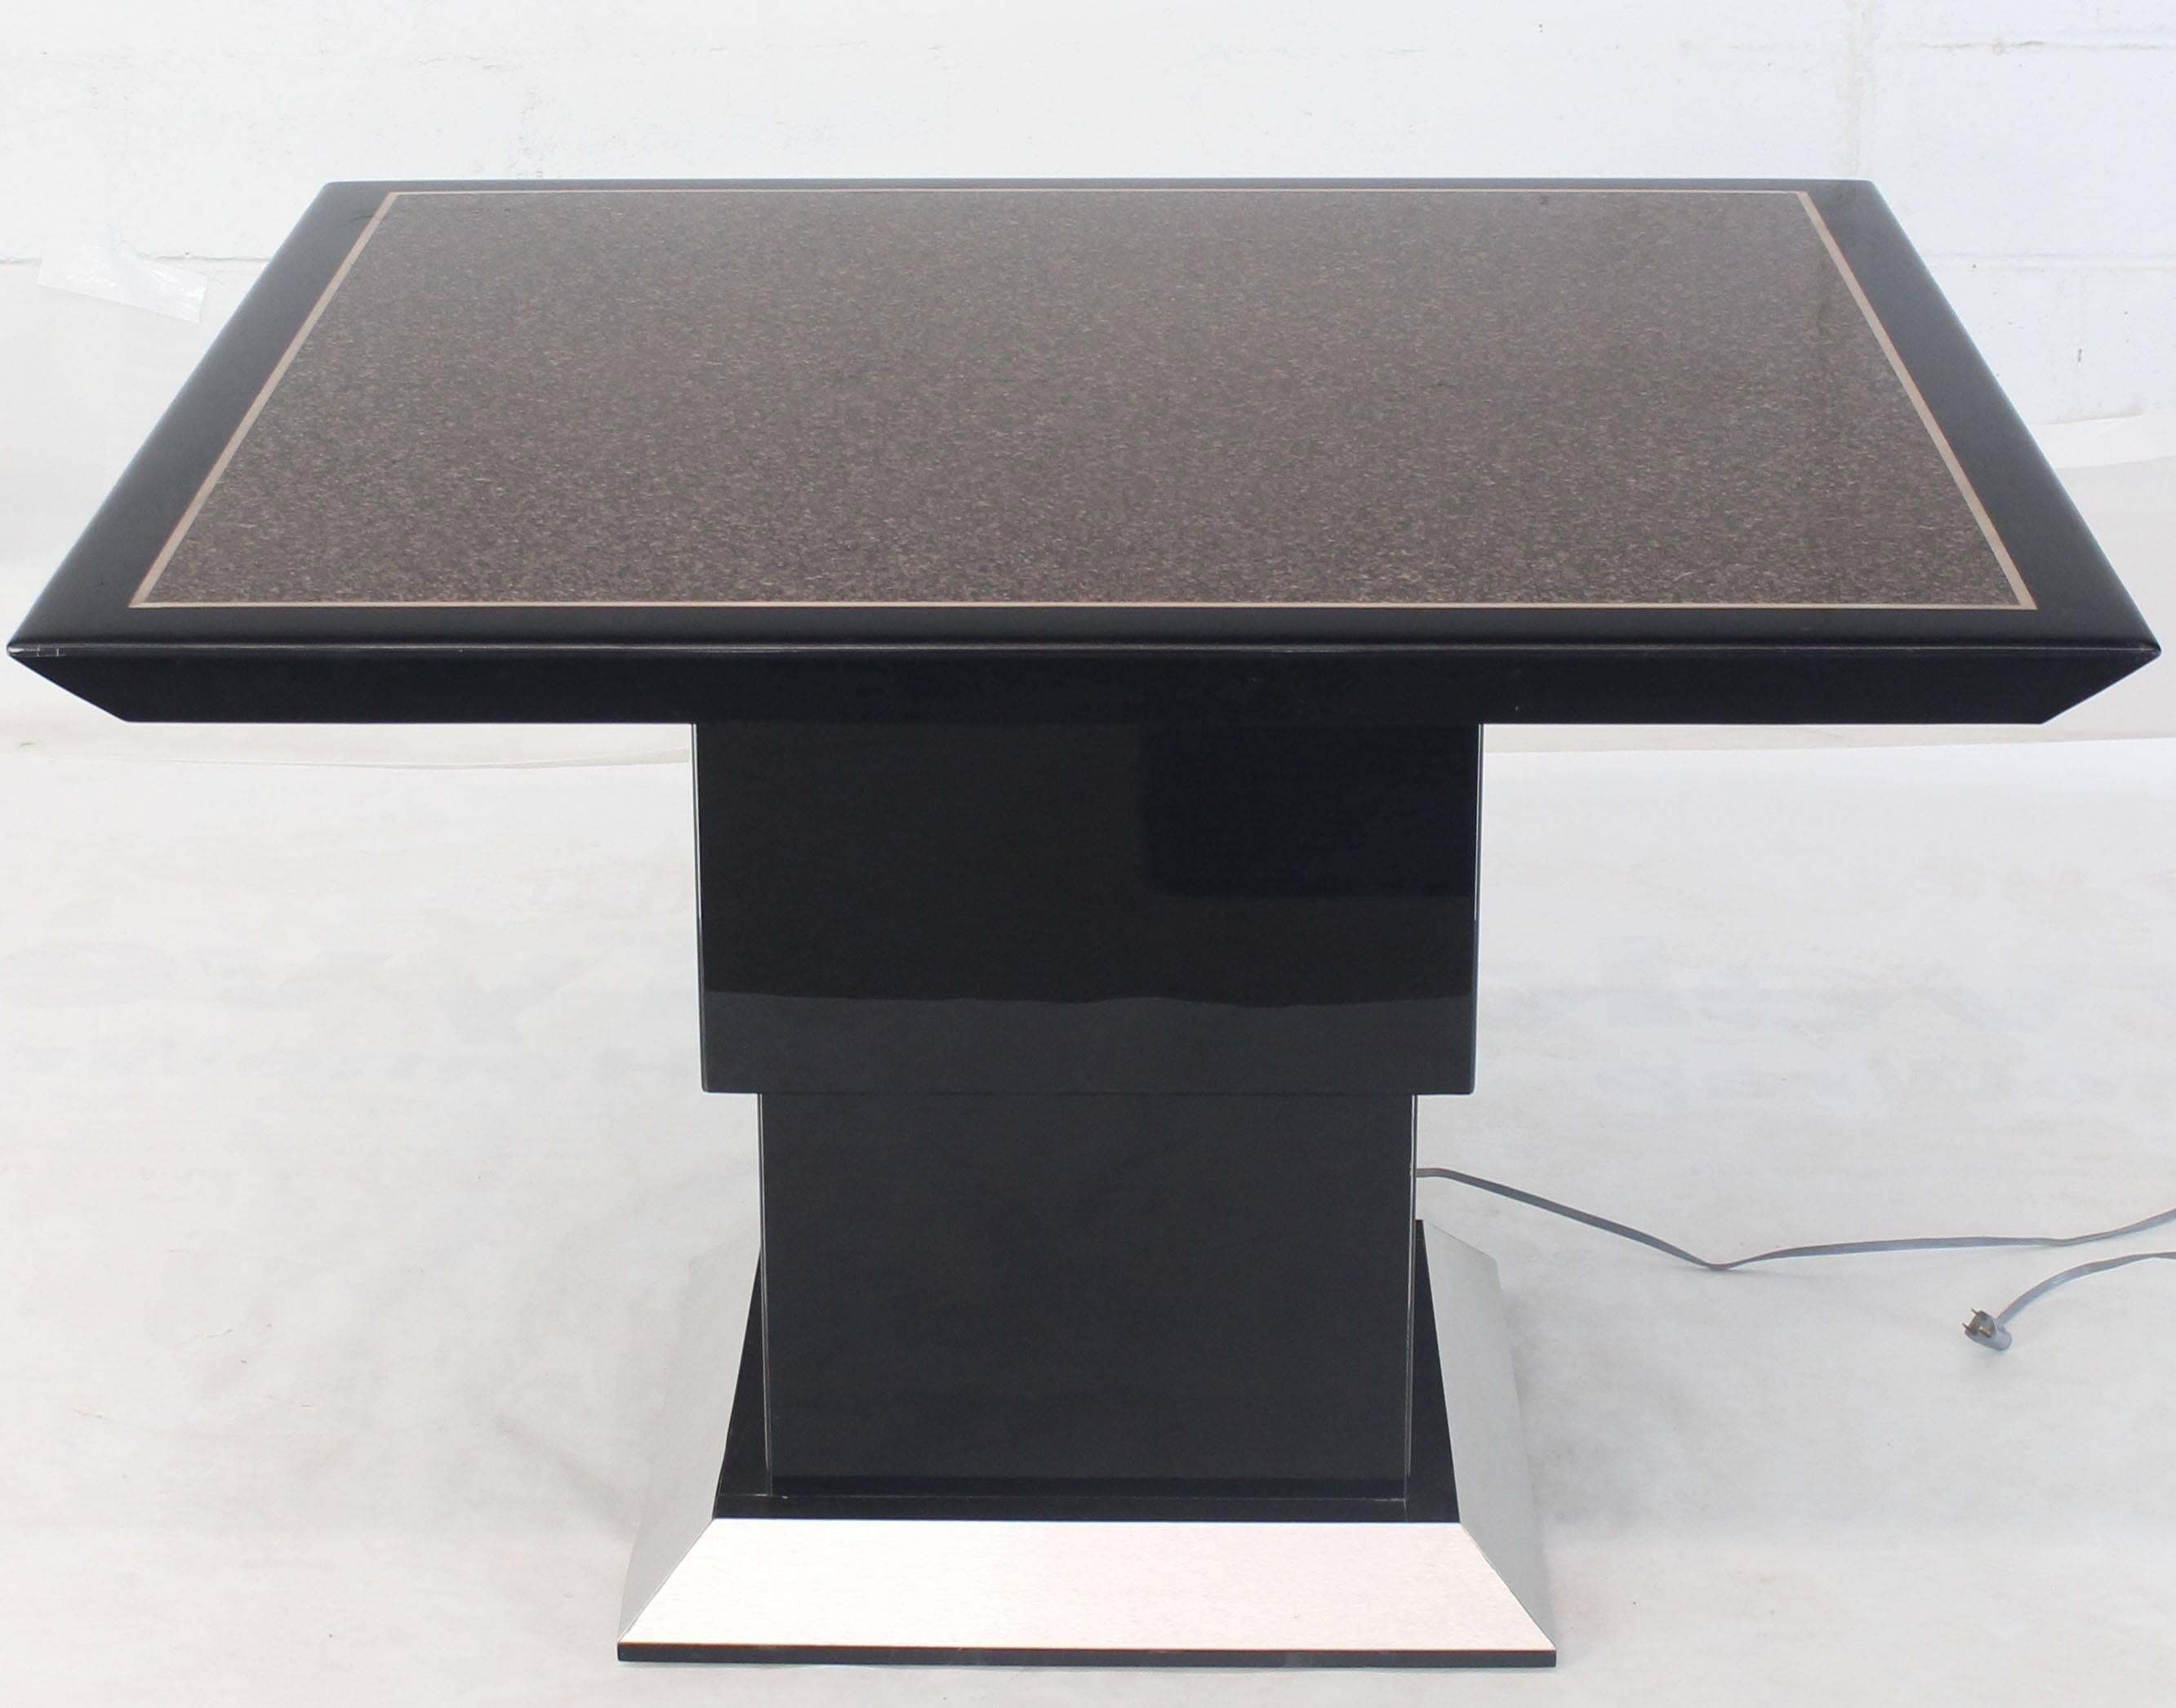 Square adjustable height faux granite finish dining coffee or game table. Unique custom built design adjustable height table with a remote control. Beautiful black lacquer finish.